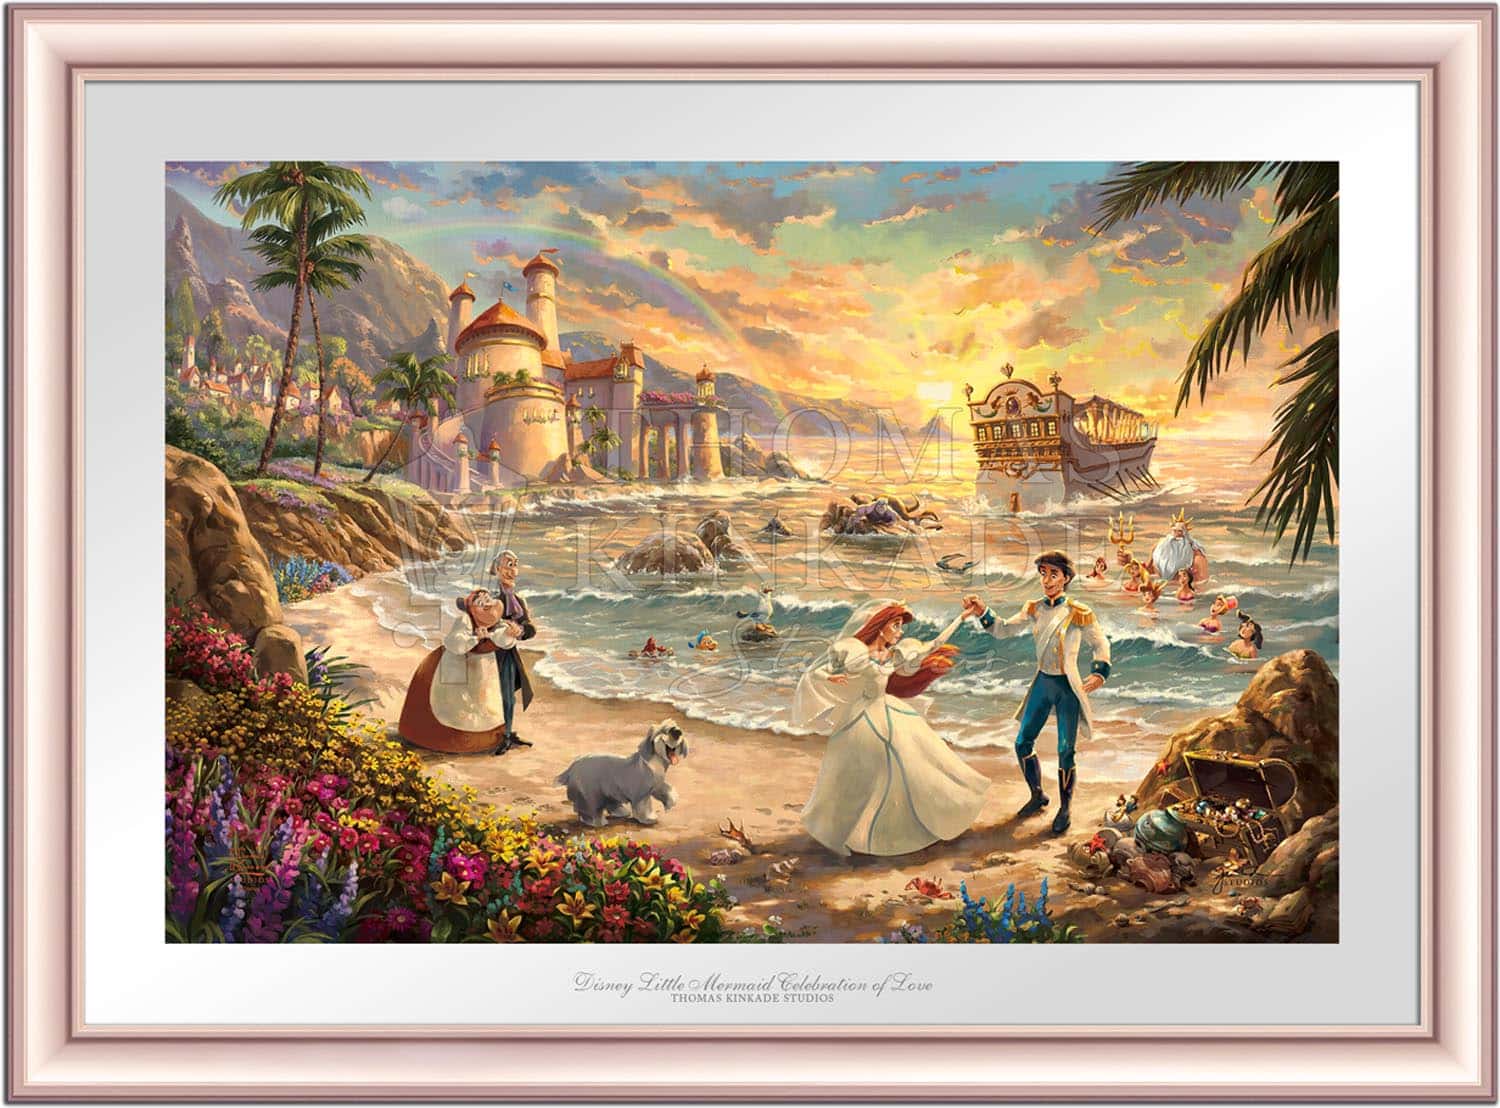 Special Buy One Get One Offer for Mom Promotions - Thomas Kinkade Studios